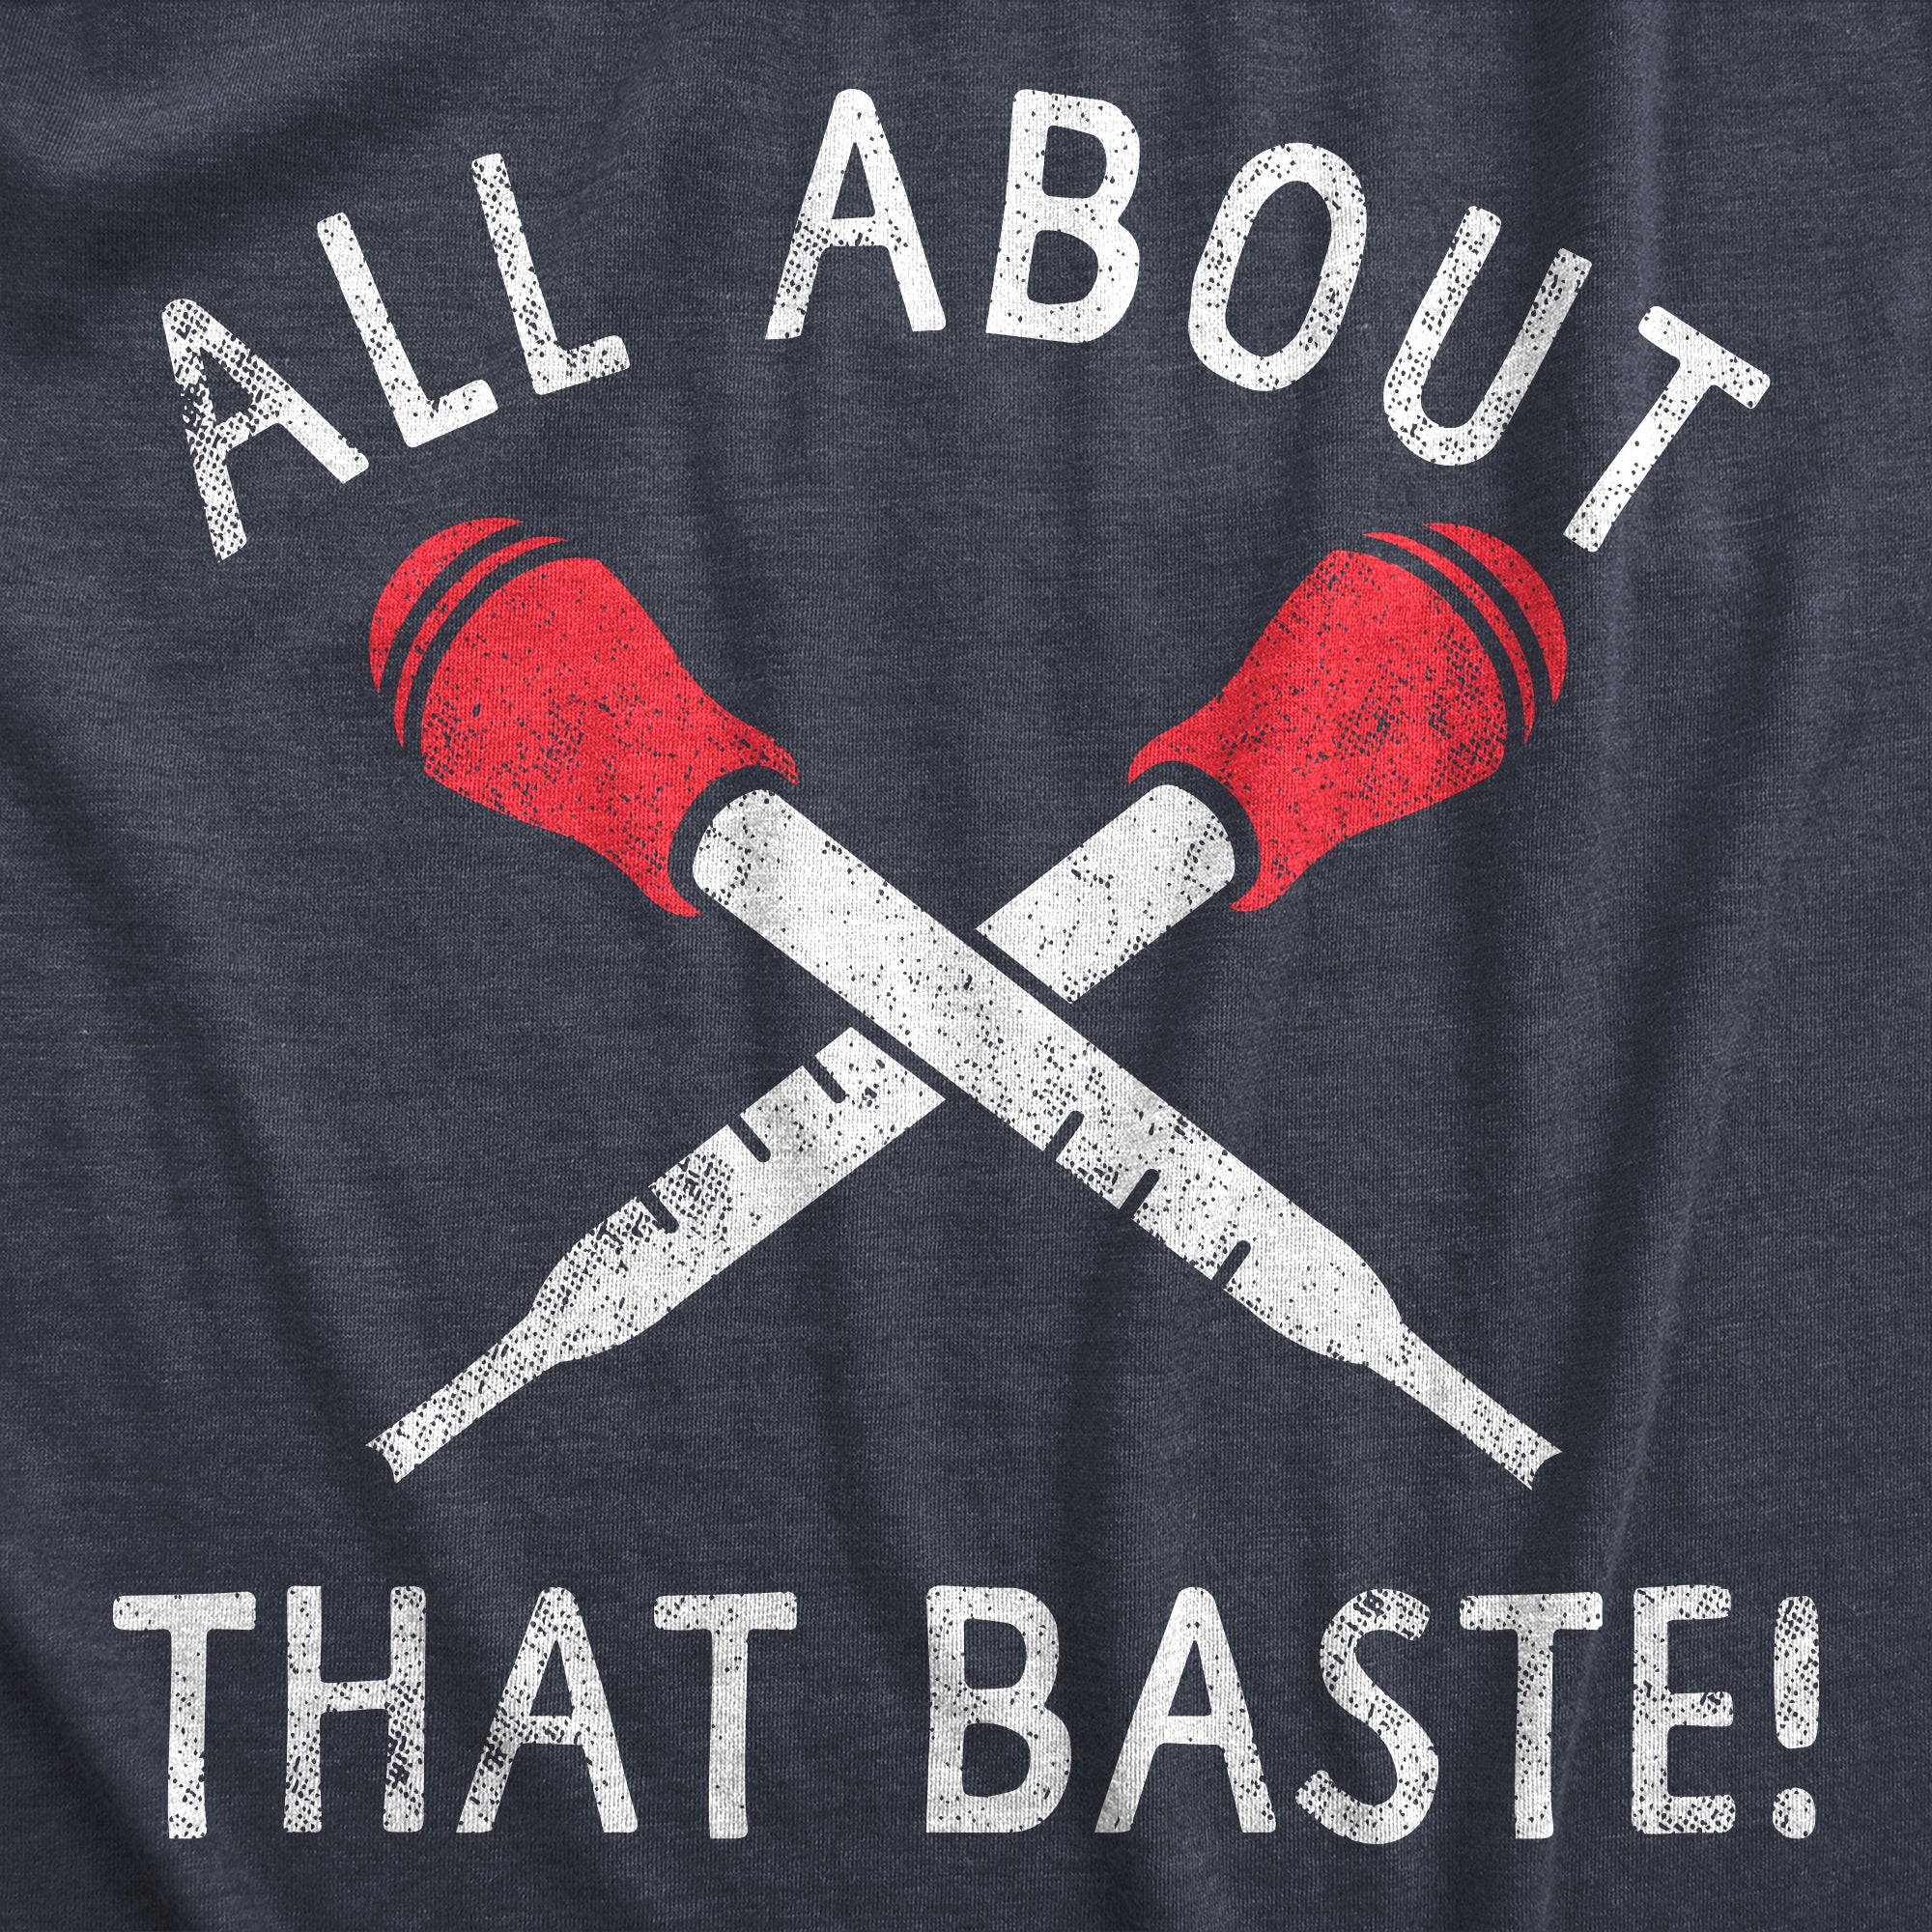 Funny Heather Navy - BASTE All About That Baste Womens T Shirt Nerdy Thanksgiving Food Tee